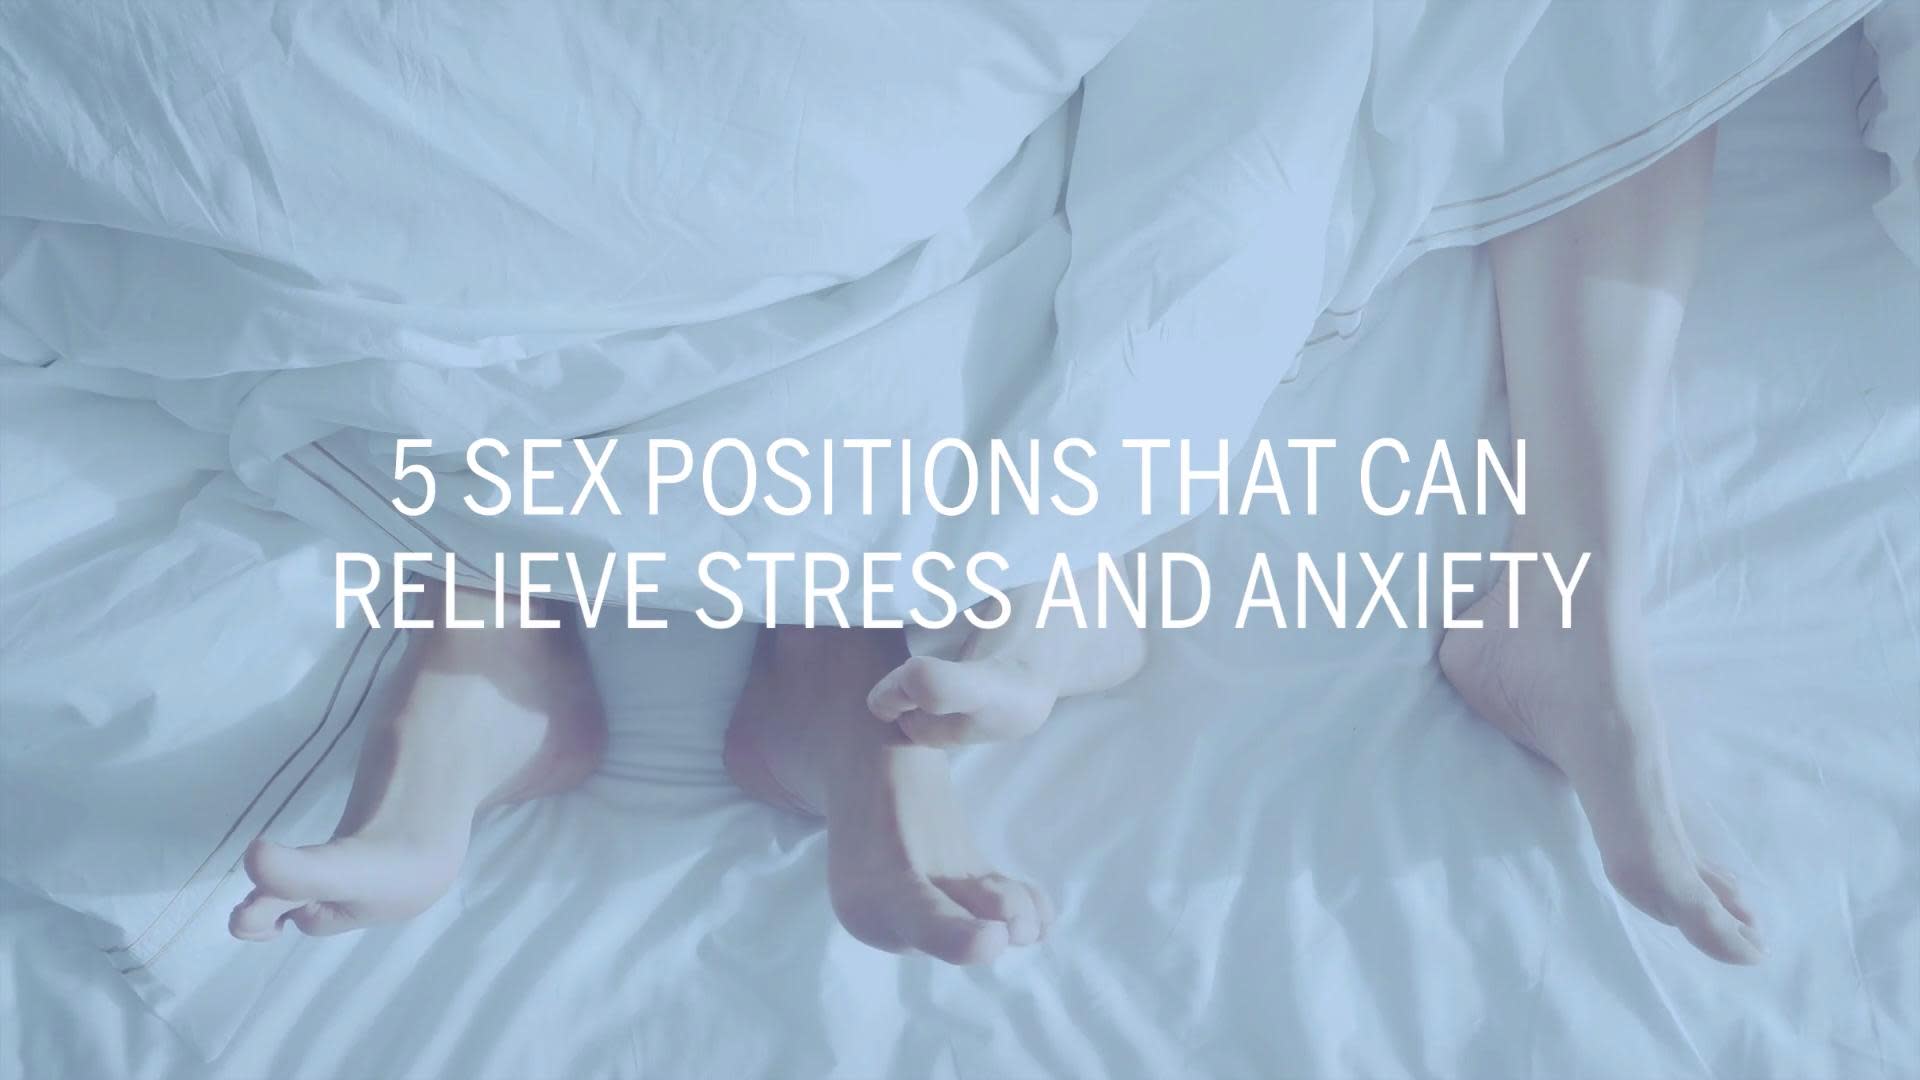 5 Sex Positions That Can Relieve Stress And Anxiety Free Download Nude Photo Gallery